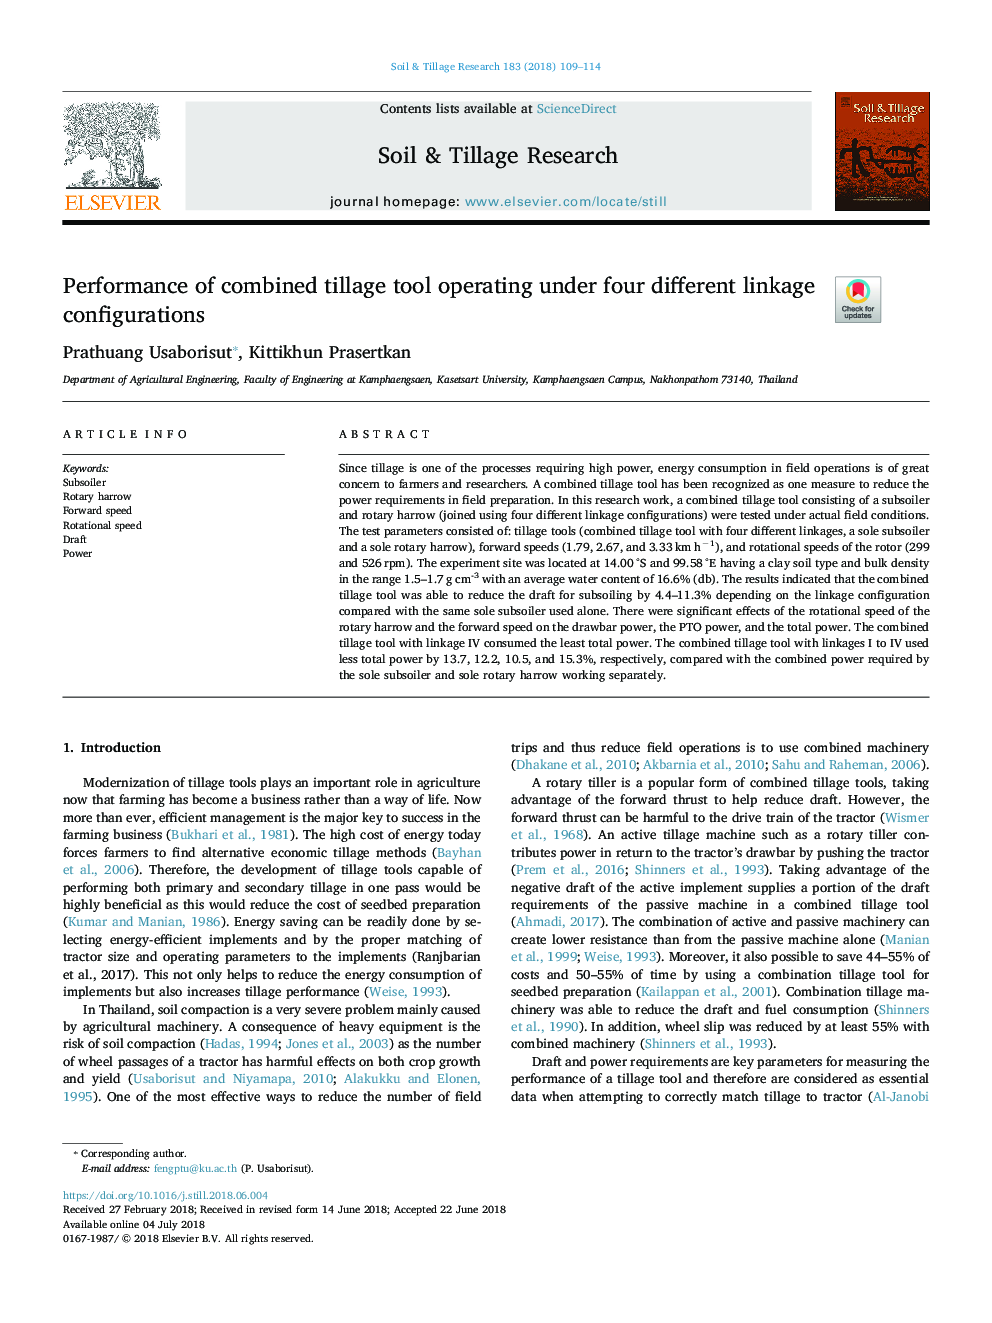 Performance of combined tillage tool operating under four different linkage configurations